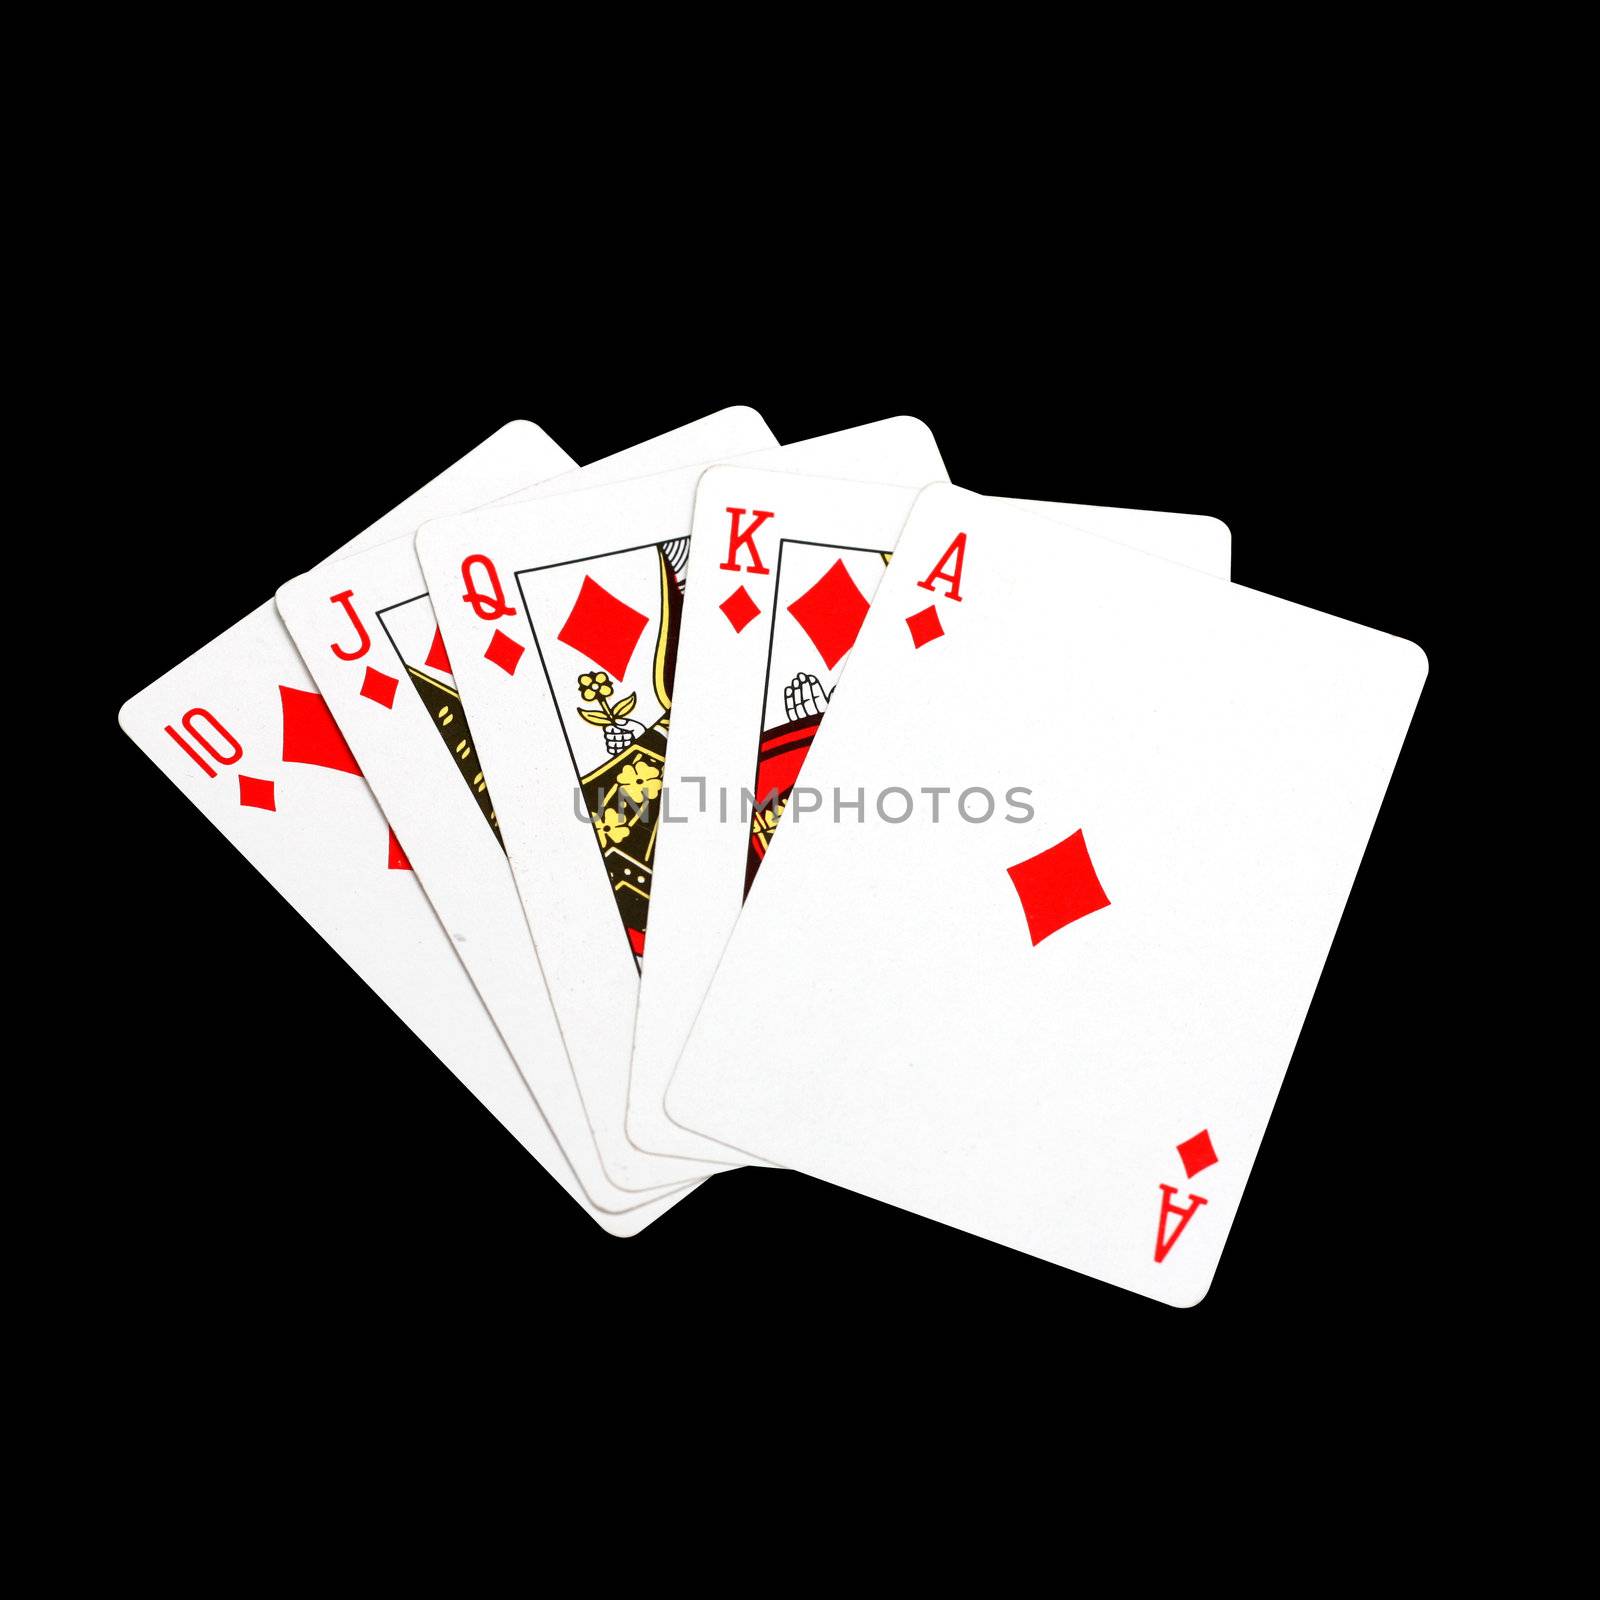 A perfect poker hand